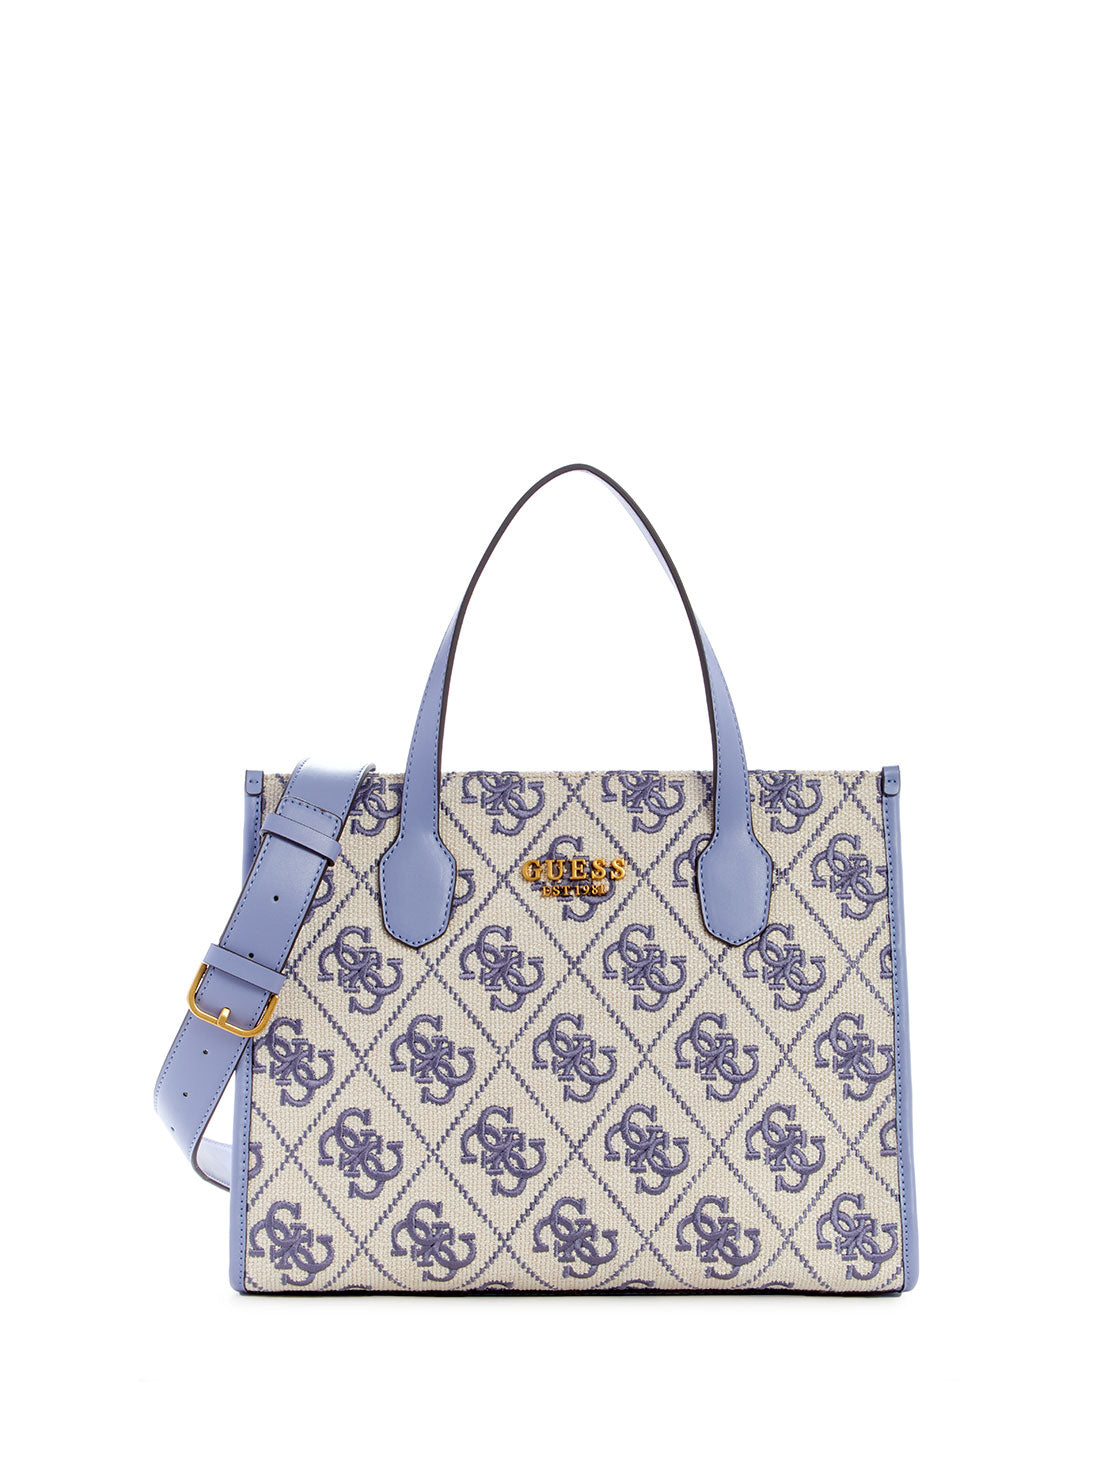 GUESS Women's Wisteria Logo Silvana Canvas Tote Bag SE866522 Front View